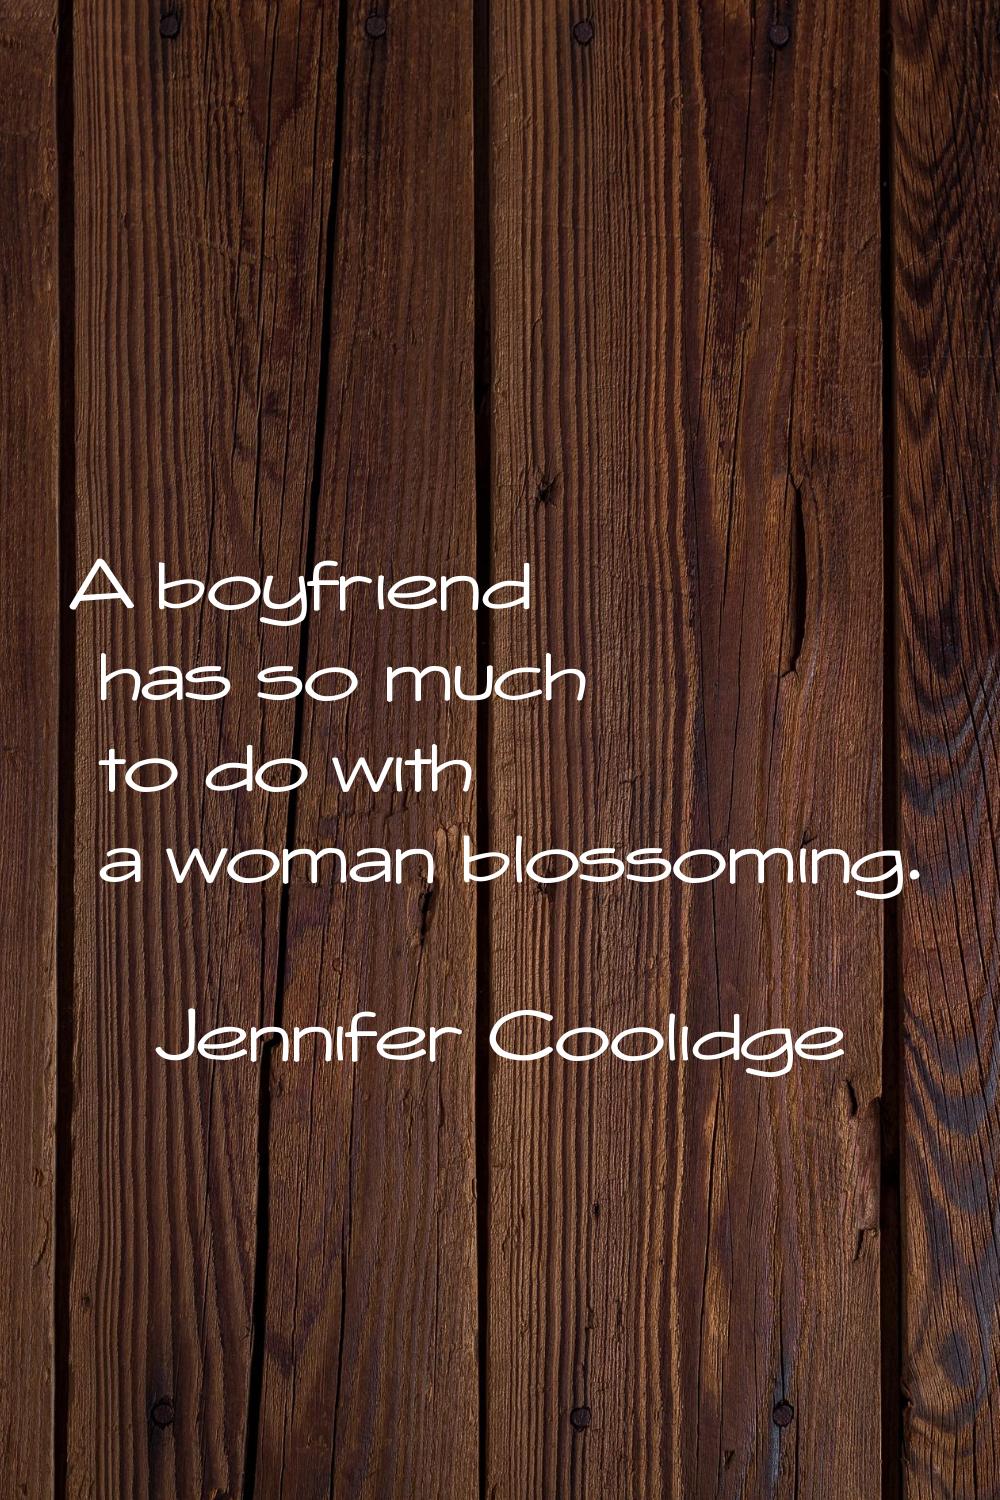 A boyfriend has so much to do with a woman blossoming.